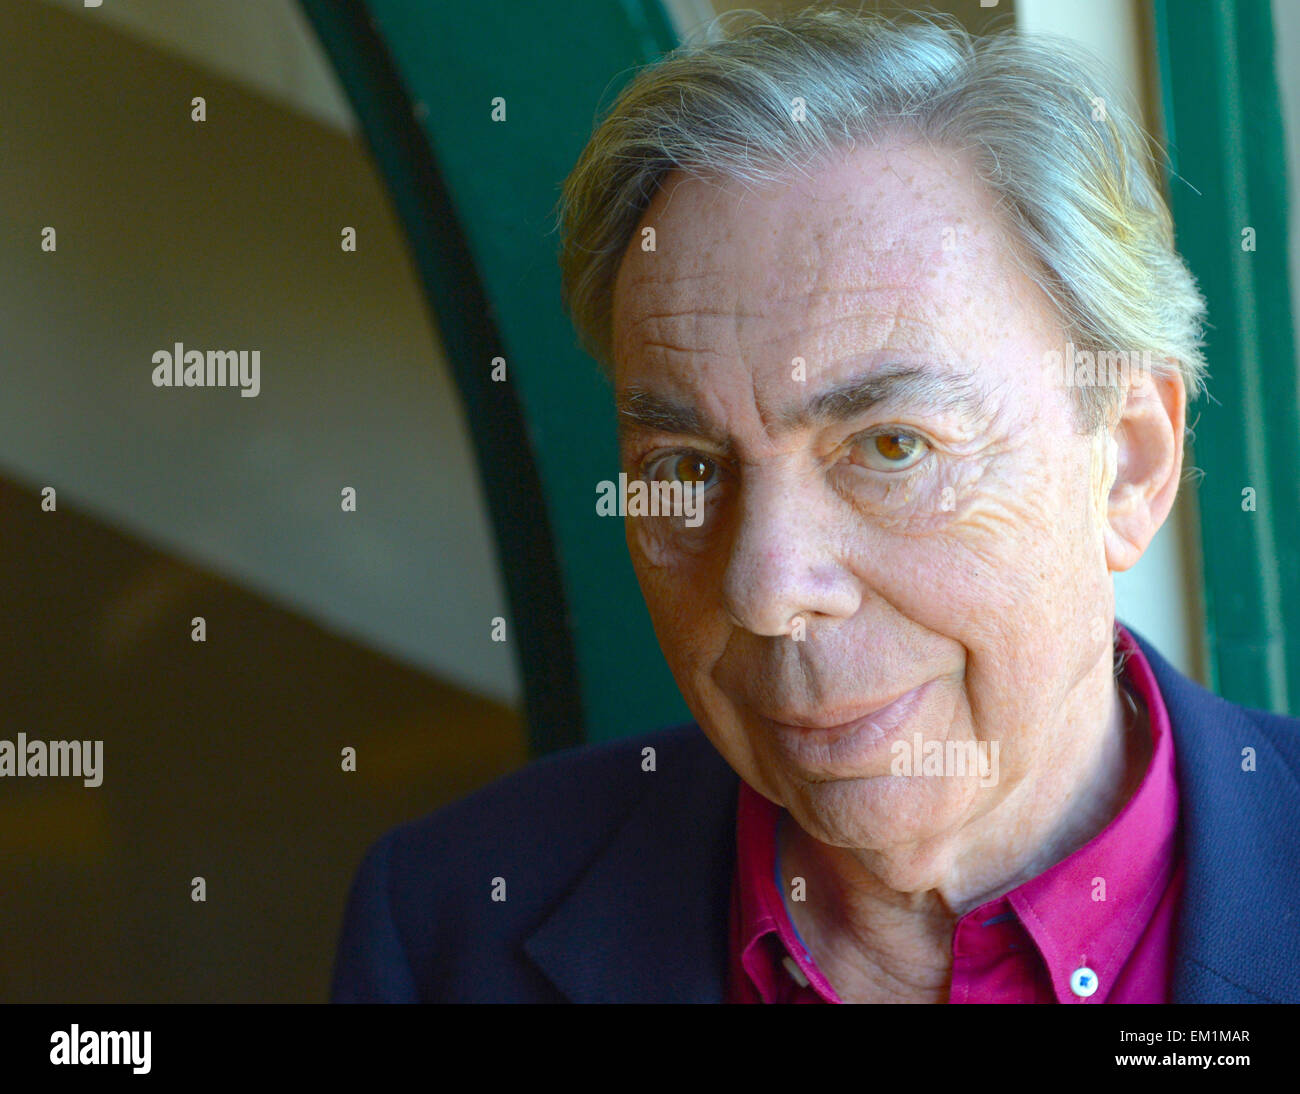 Hamburg, Germany. 15th Apr, 2015. Musical composer Sir Andrew Lloyd Webber poses in Hamburg's Speicherstadt (historic warehouse complex) in Hamburg, Germany, 15 April 2015. Webber is keenly awaiting the new production of 'Liebe stirbt nie' (Love never dies), the follow-up of his worldwide musical success 'The phantom of the opera' in Hamburg. Photo: HENRIK JOSEF BOERGER/dpa/Alamy Live News Stock Photo